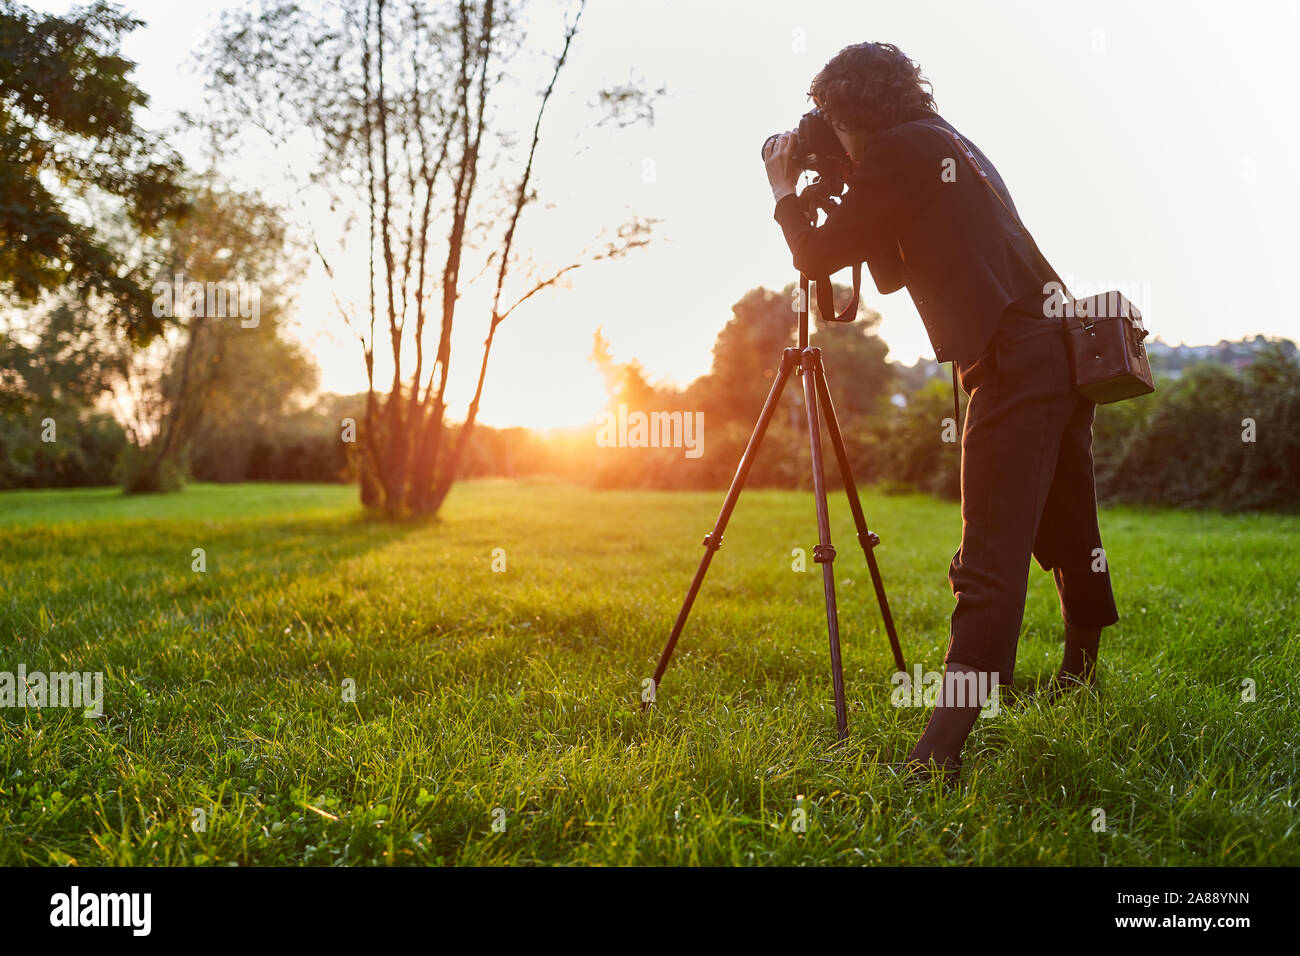 Young woman as a professional photographer makes landscape photography Stock Photo